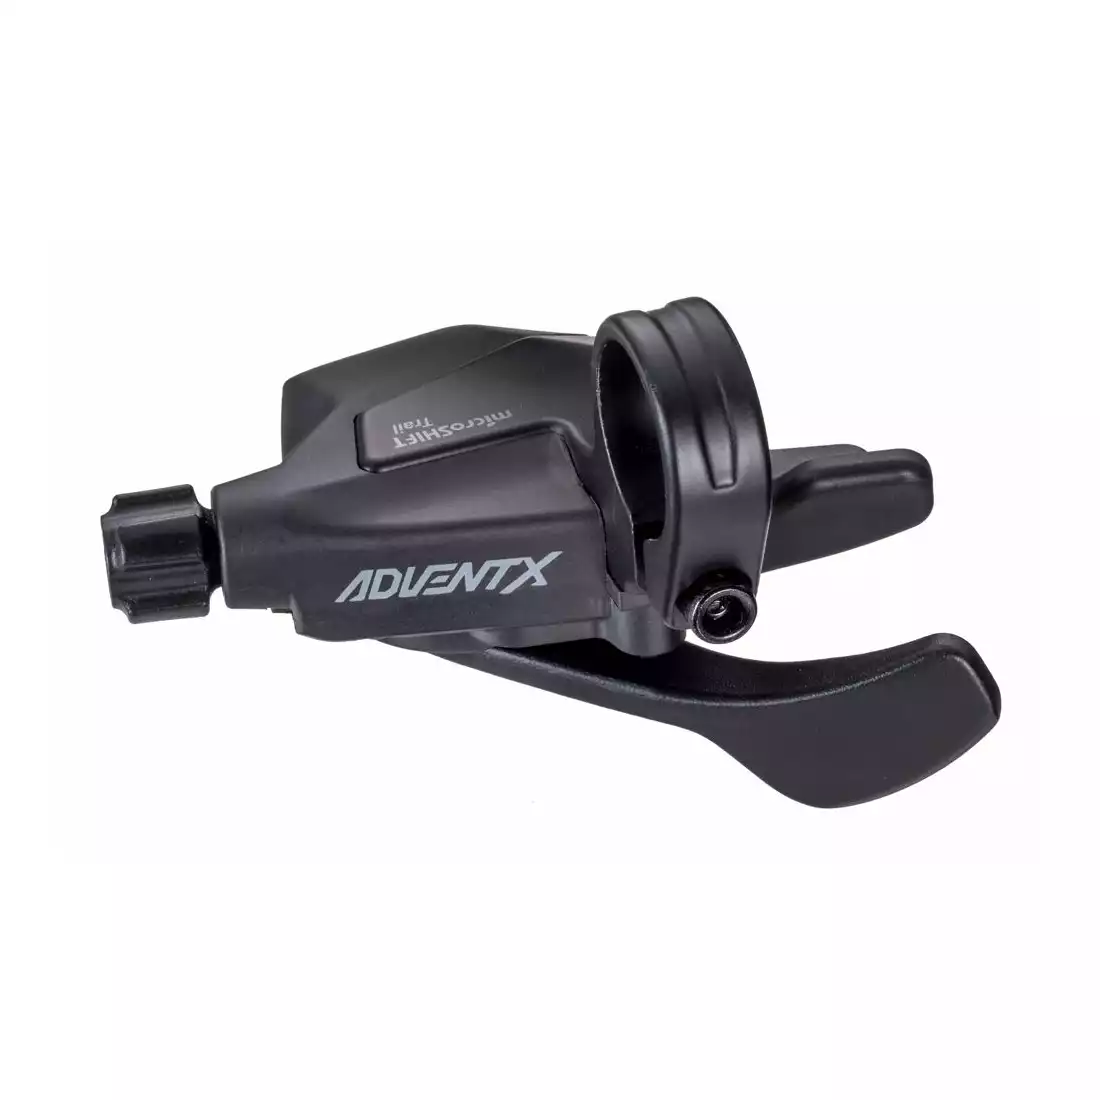 MICROSHIFT ADVENT X Right bicycle lever, 10-speed, black